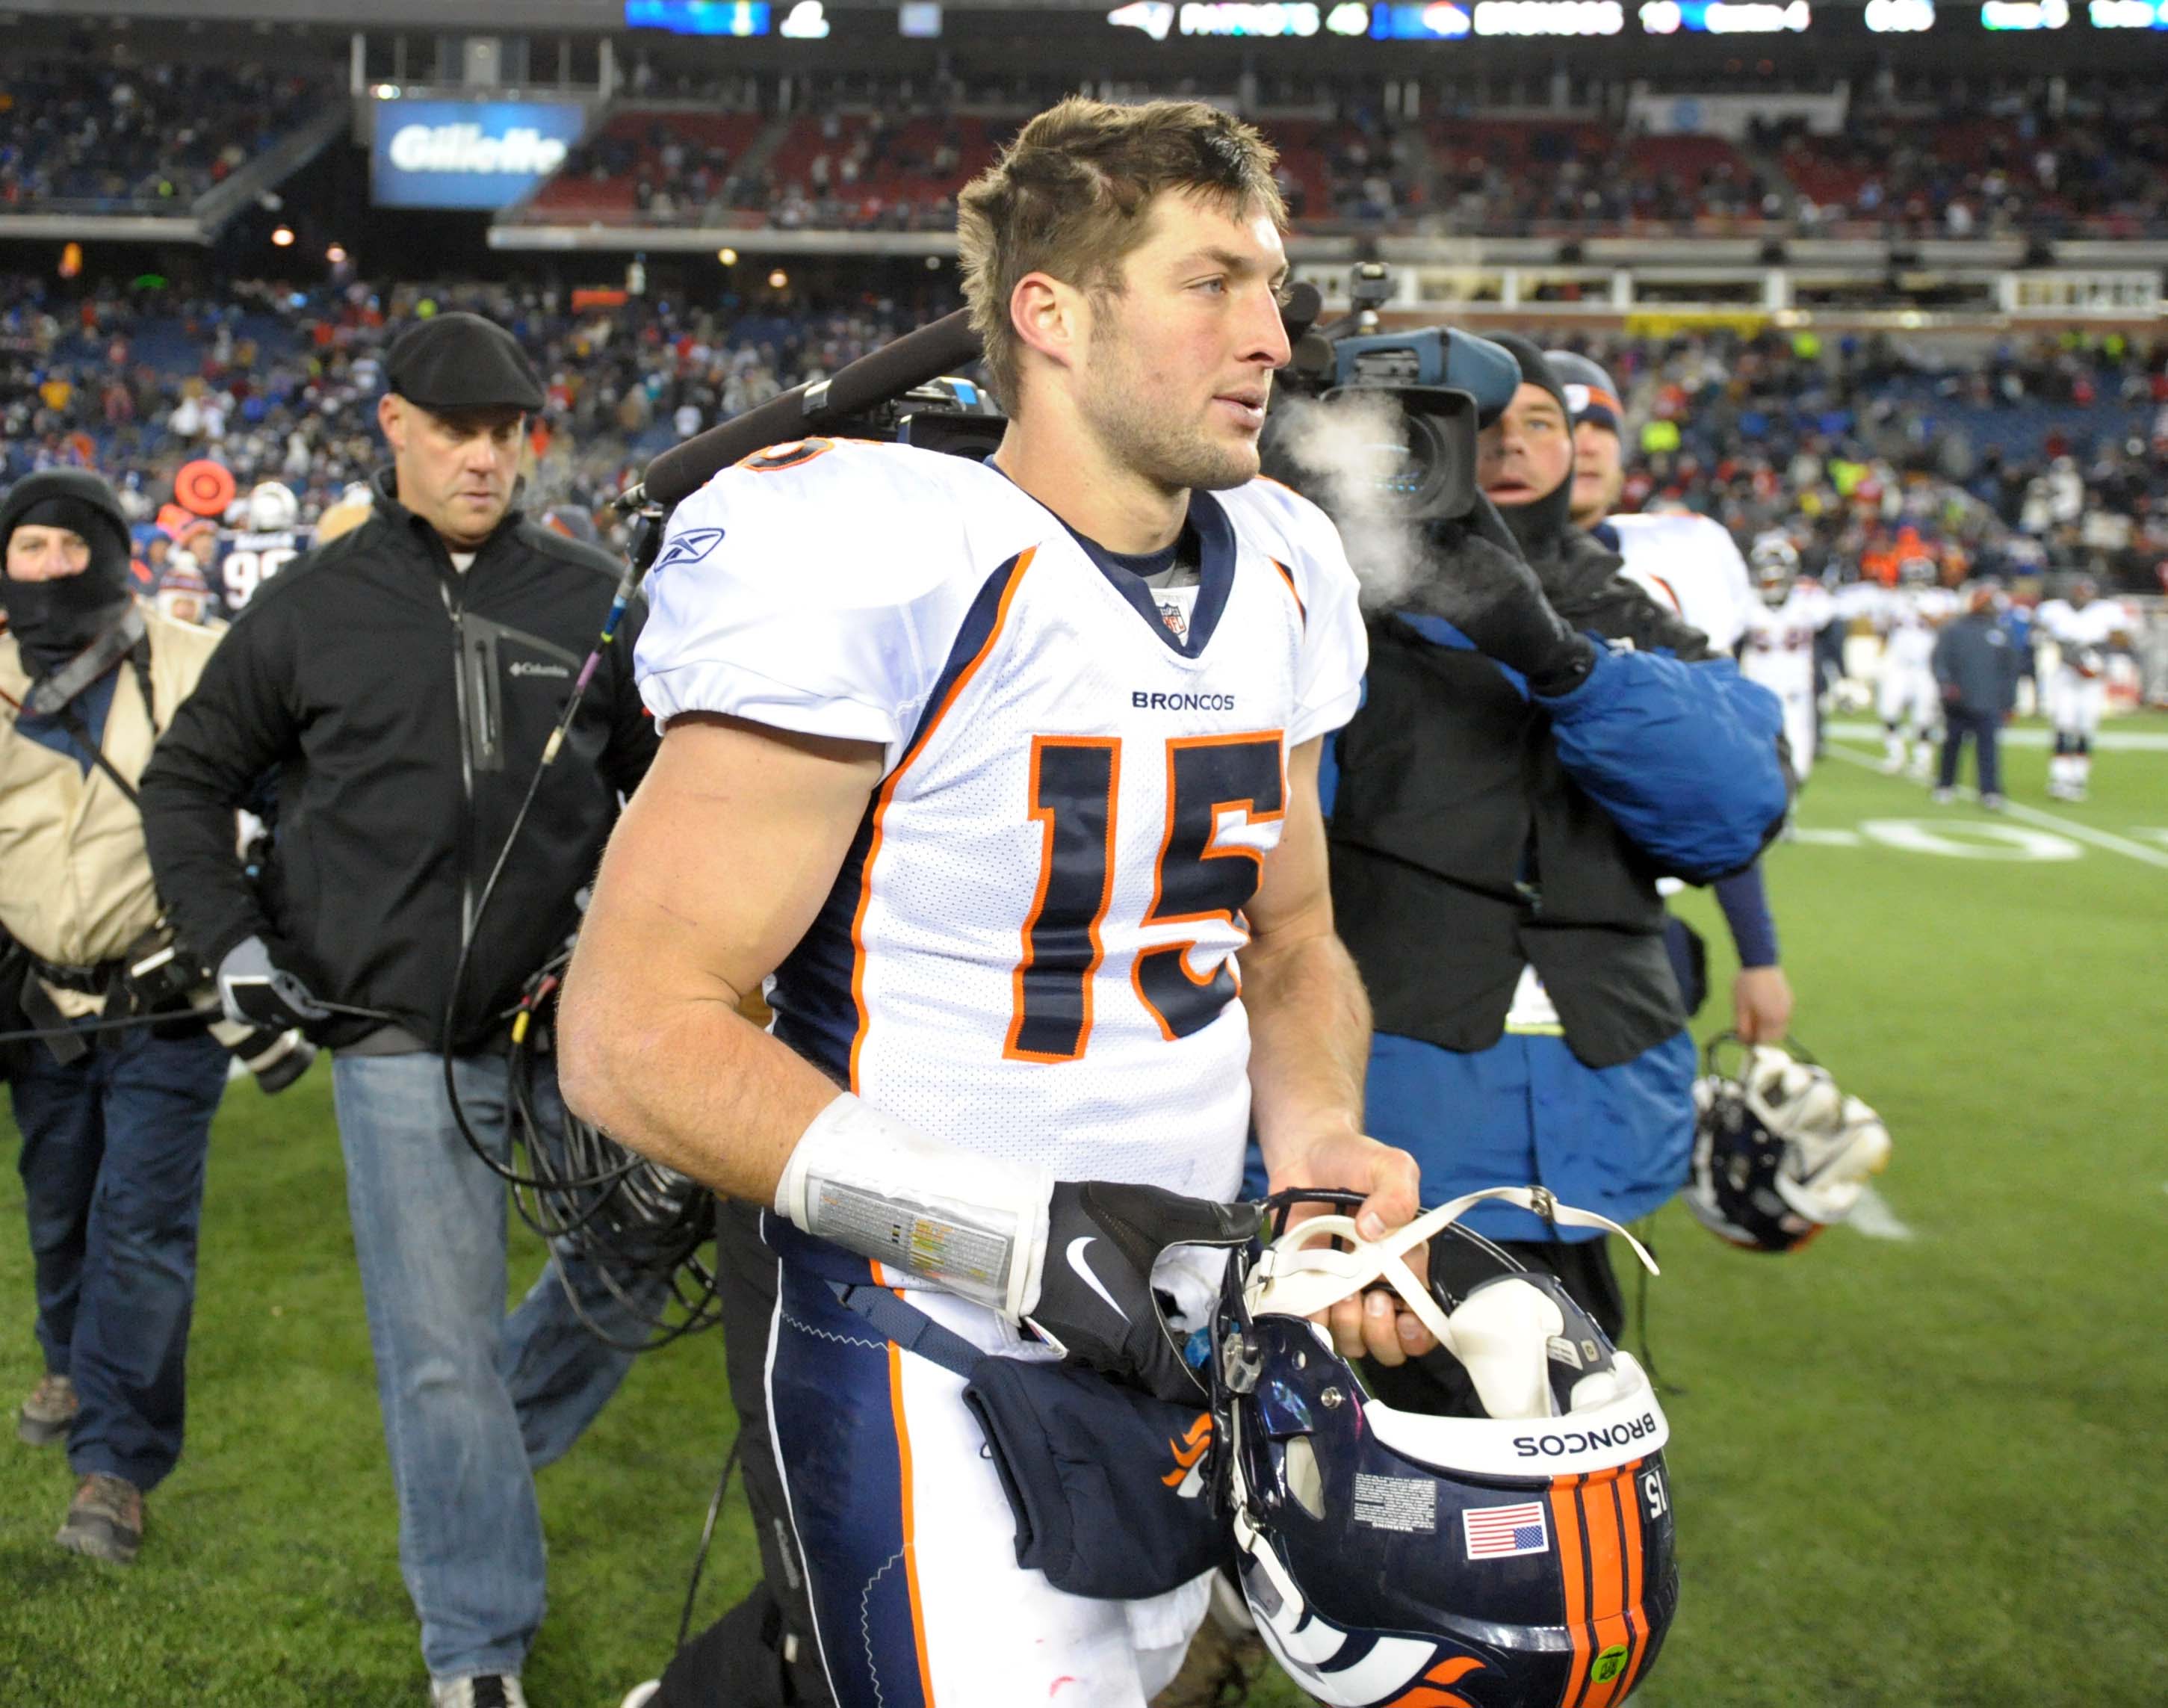 Folks who bought Tim Tebow jerseys are out of luck, despite